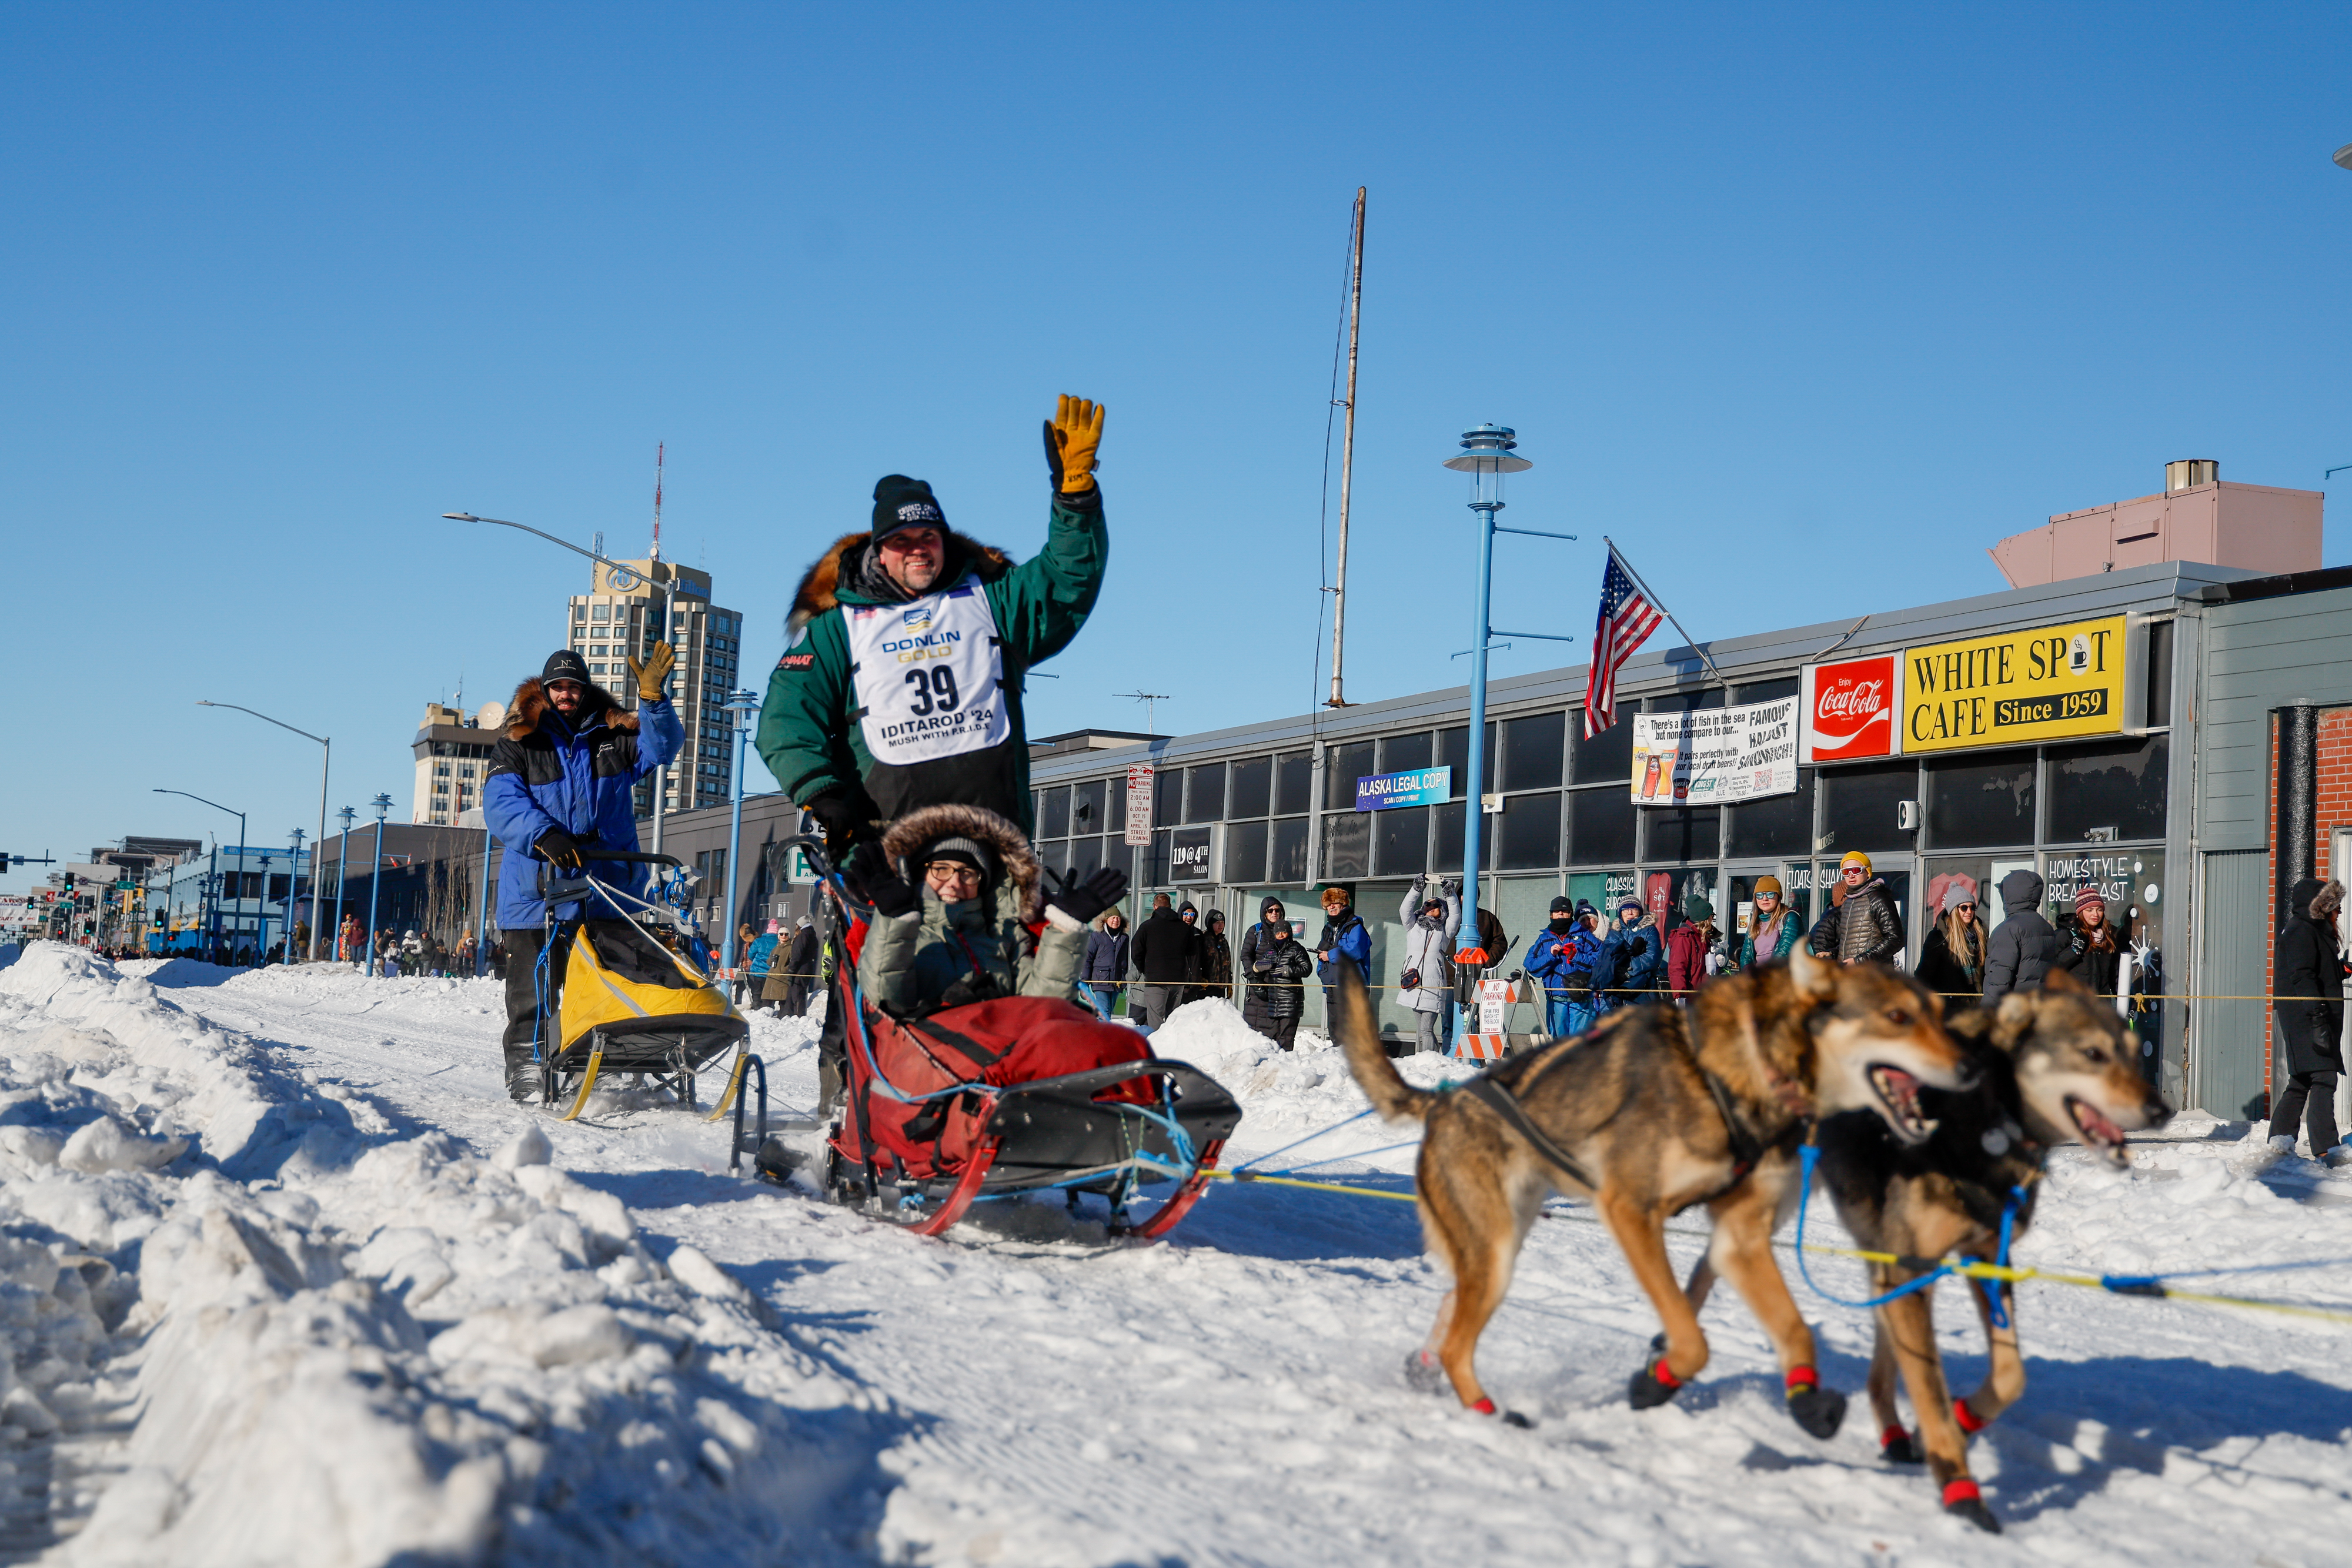 Musher Wally Robinson agreed to run Josh McNeal's team for the 2024 event, according to the race website, with his friend recuperating from an injury. An Iditarod veteran who moved to Alaska in 1999, Robinson finished eleventh of 28 mushers who finished the race, completing the trek in 9 days, 23 hours, 22 minutes, 22 seconds. Photo by Chris Rose.